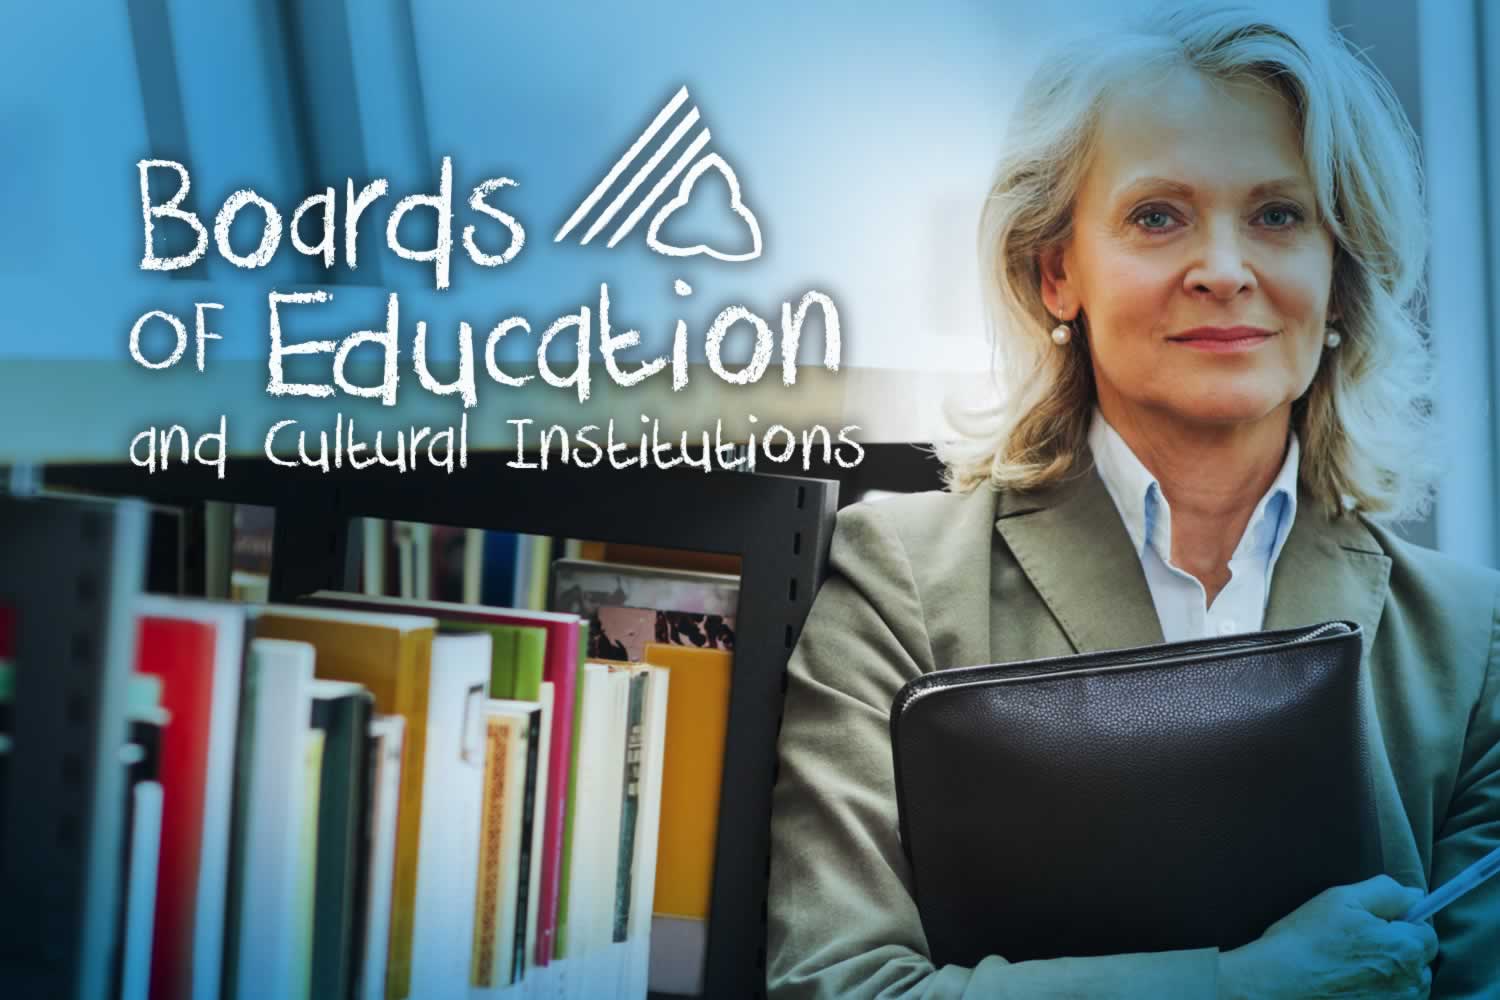 Boards of Education and Cultural Institutions